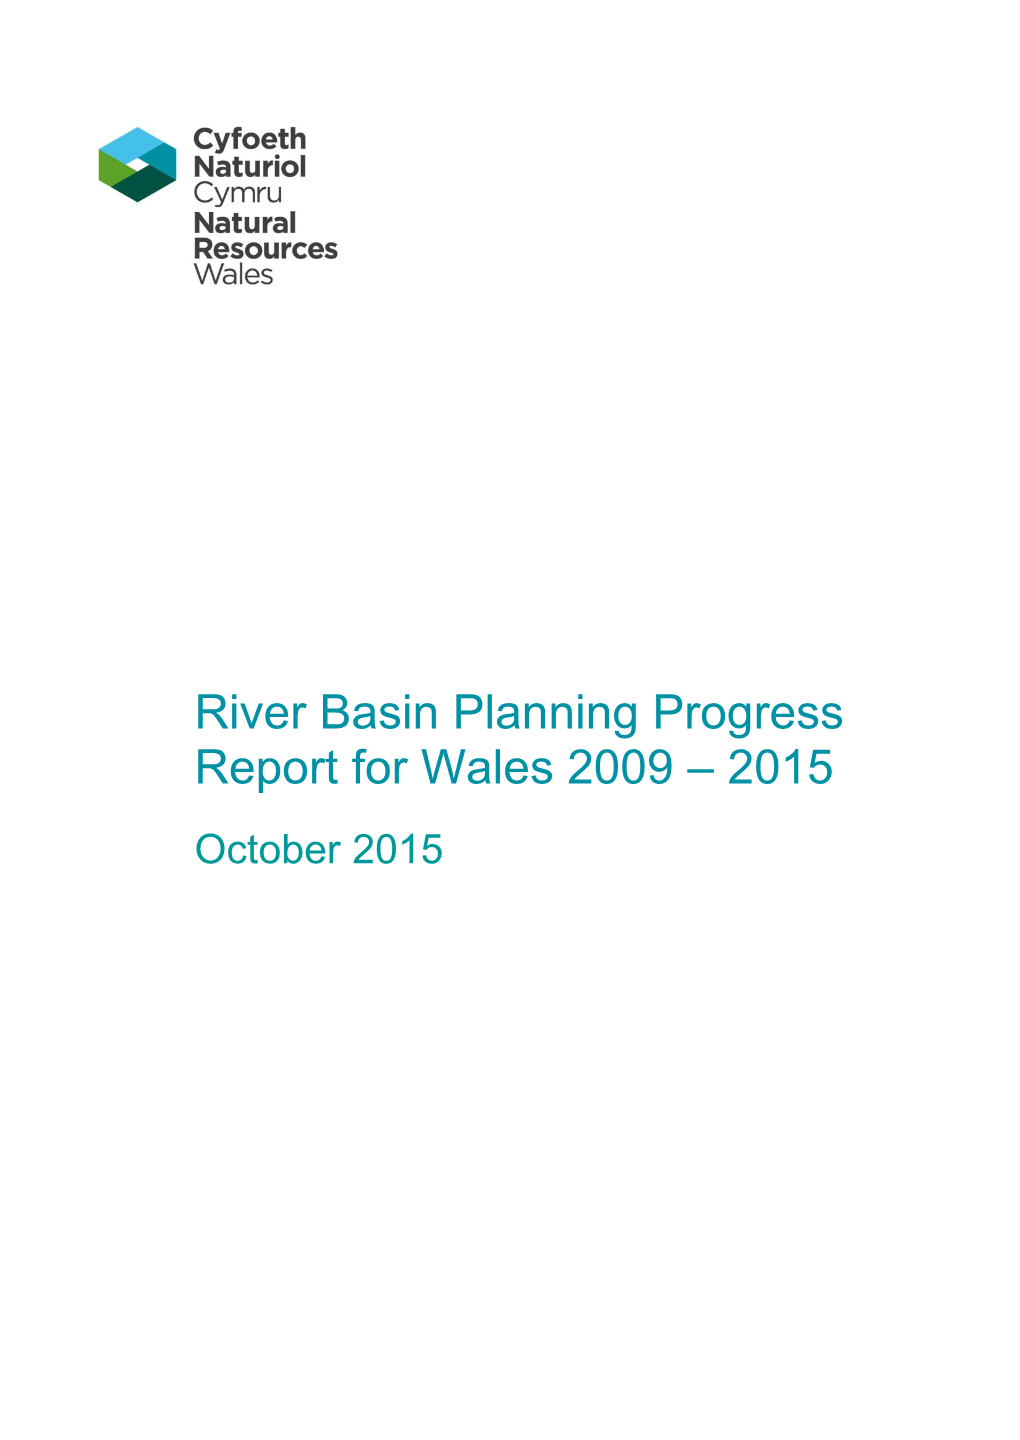 River Basin Planning Progress Report for Wales 2009 – 2015